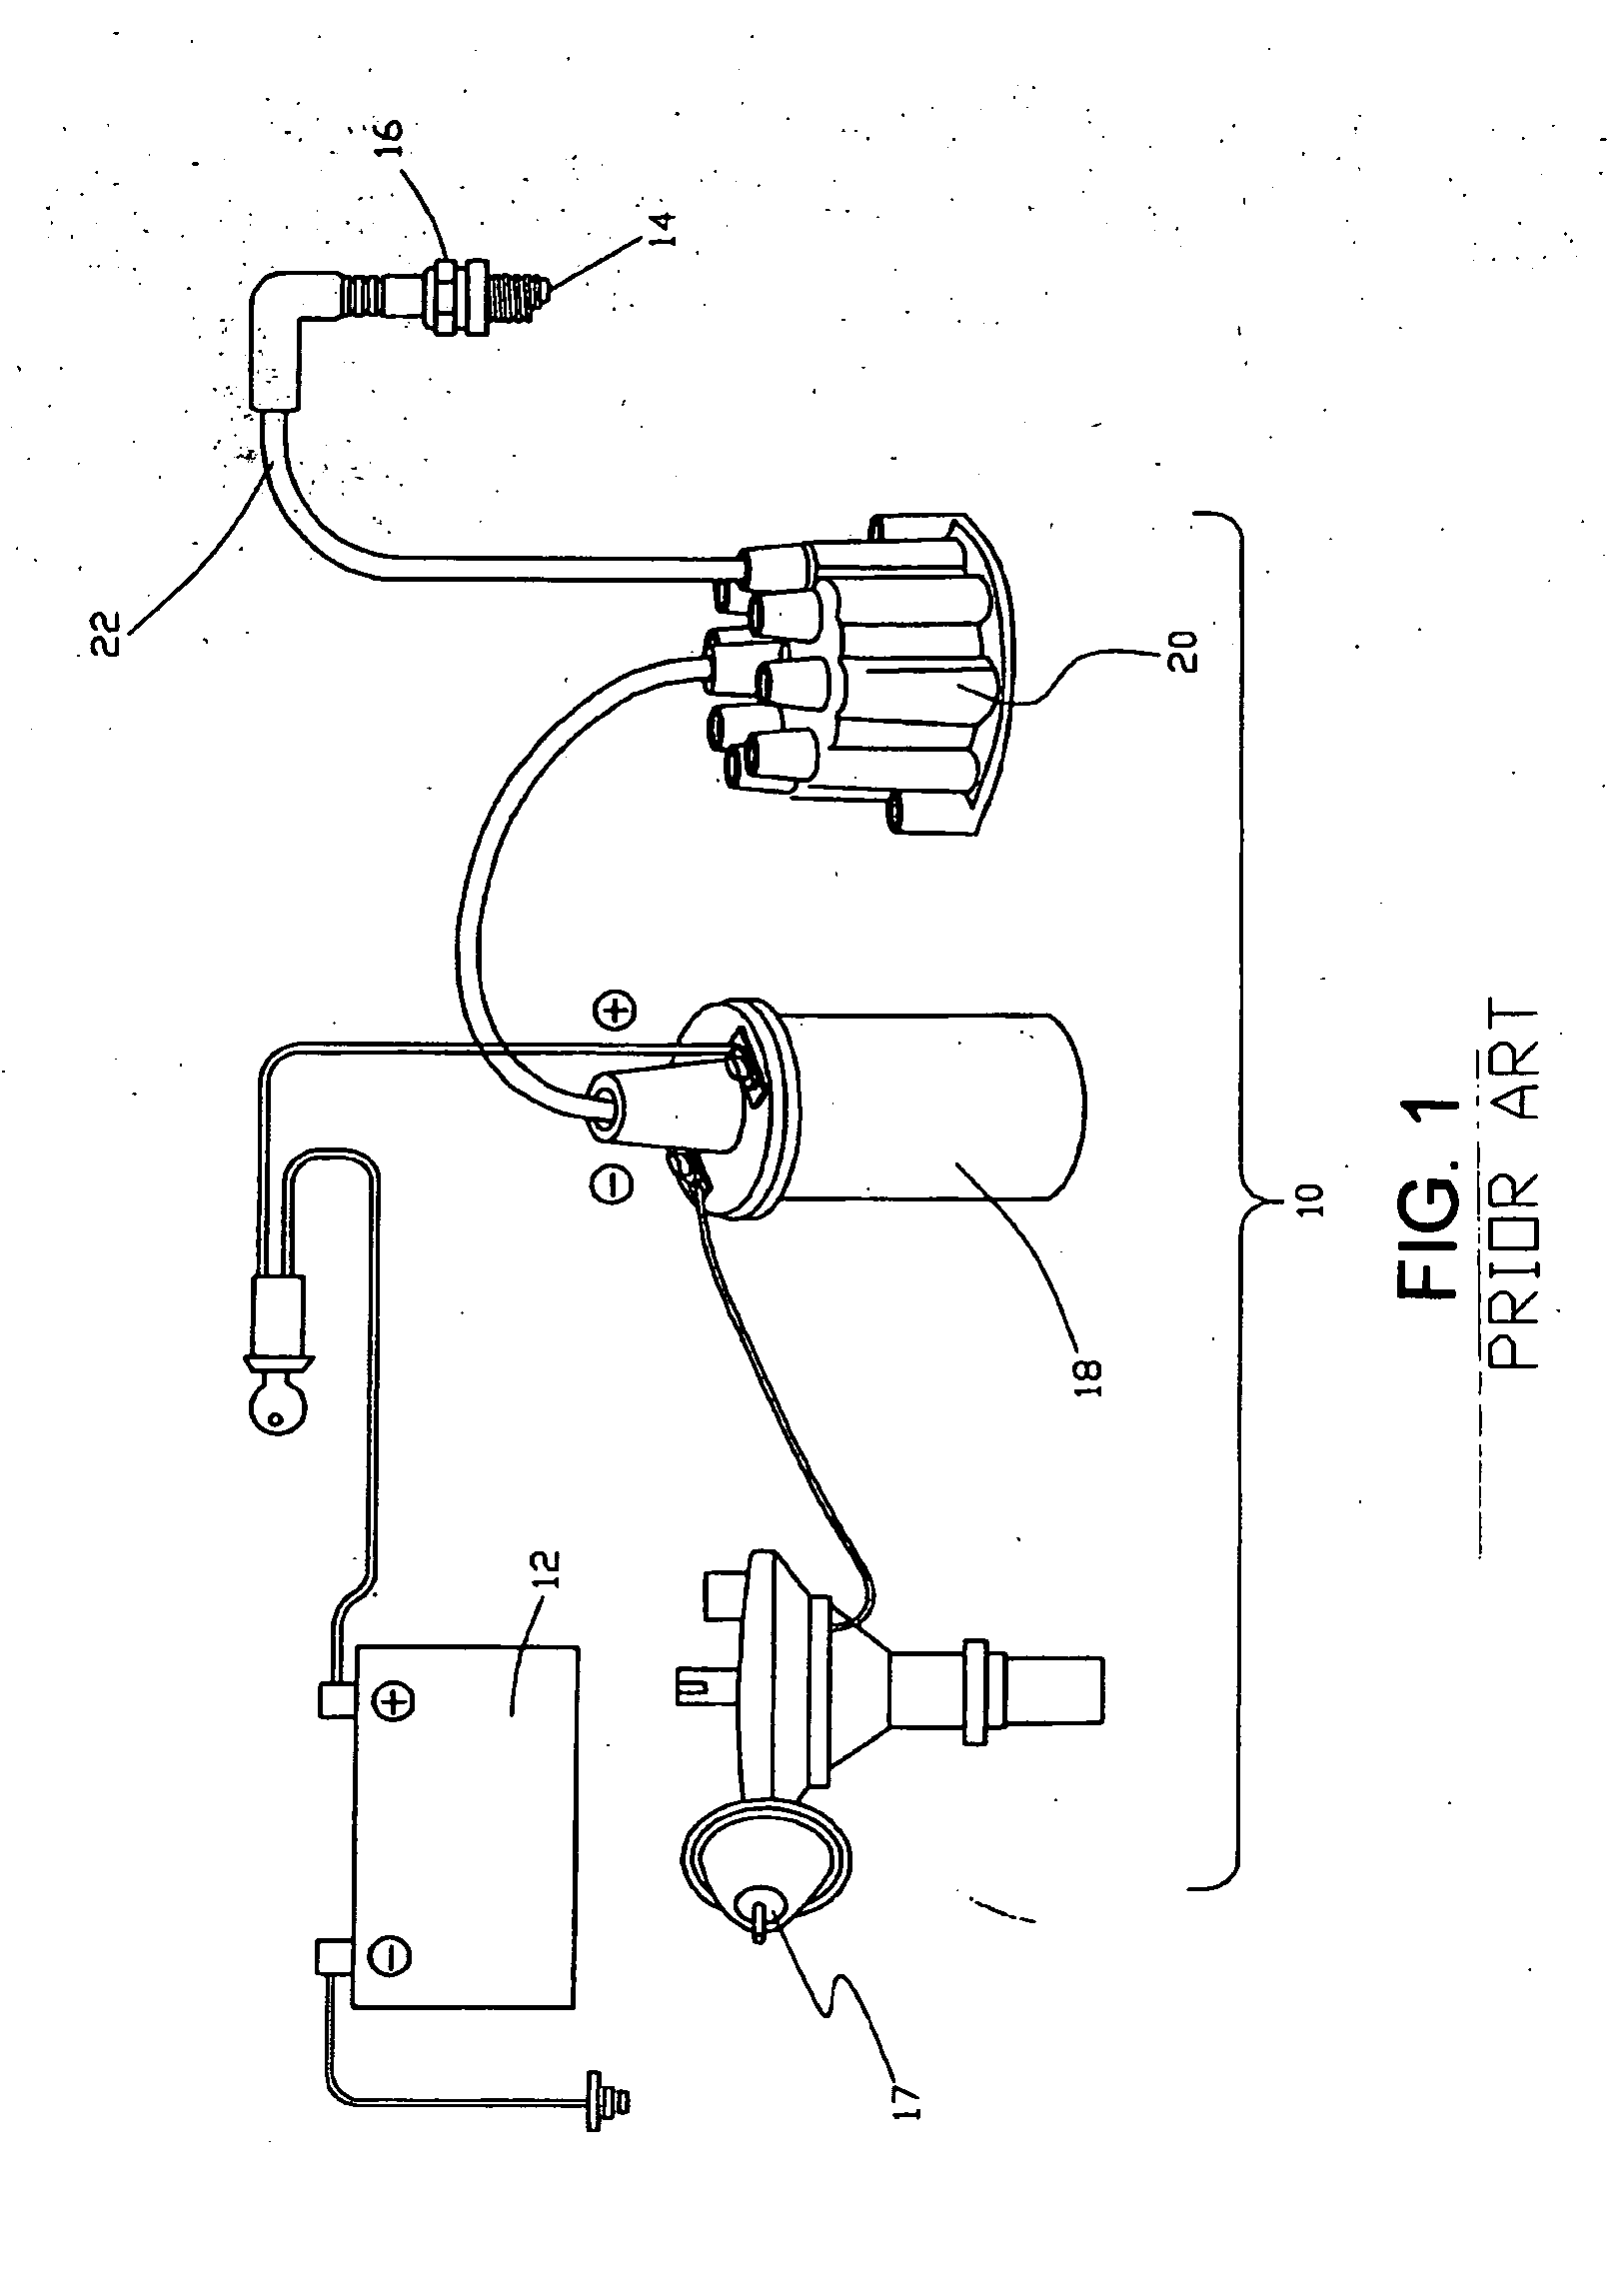 Automobile Ignition with Improved Coil Configuration